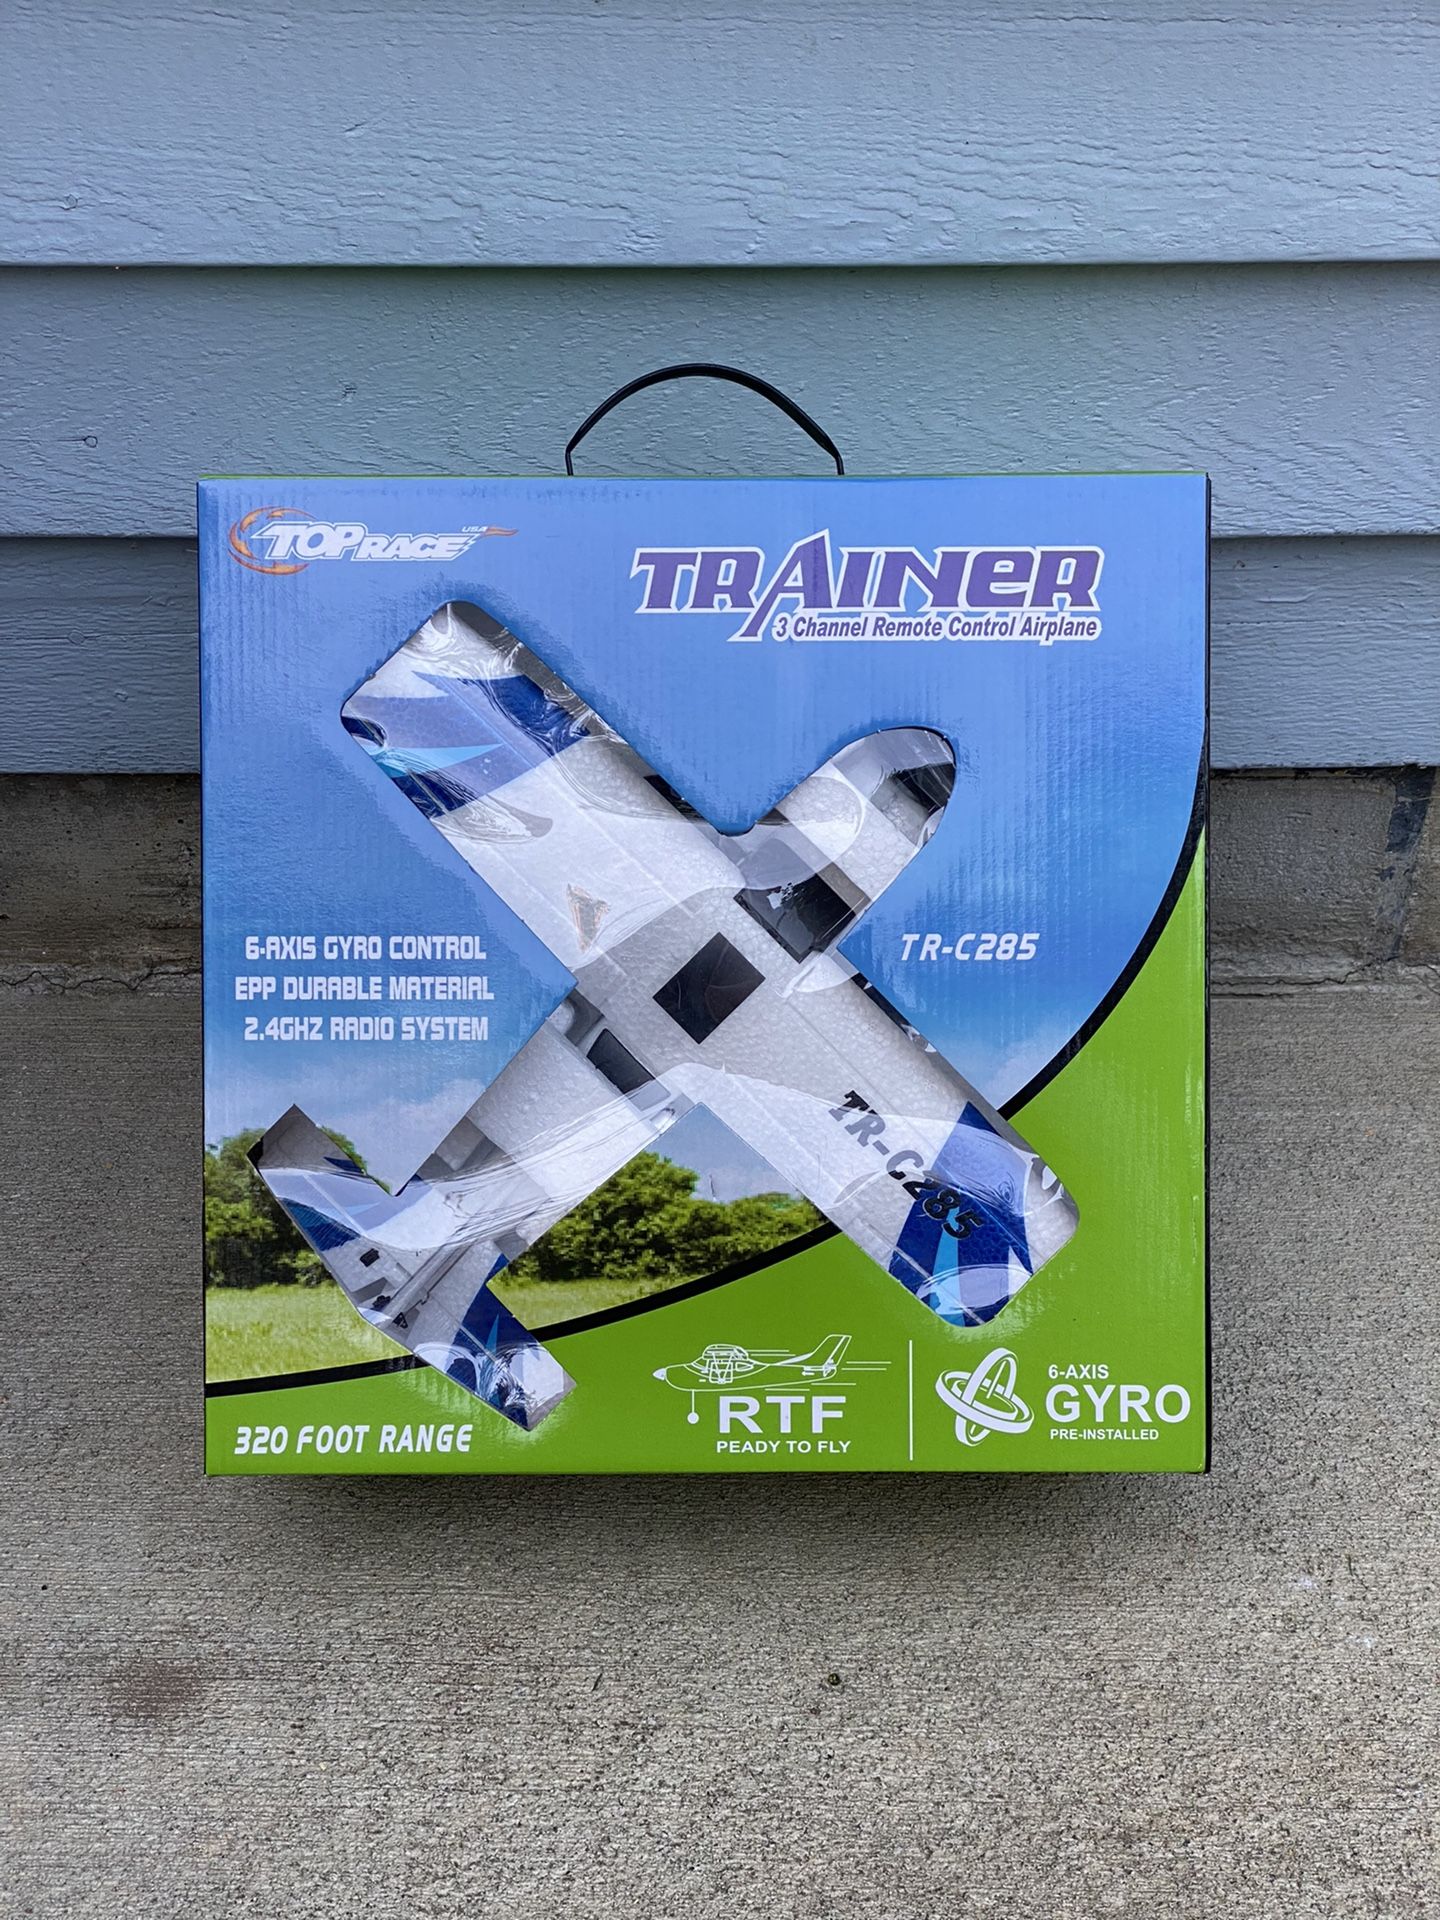 TopRace 3 Channel Remote Control Airplane